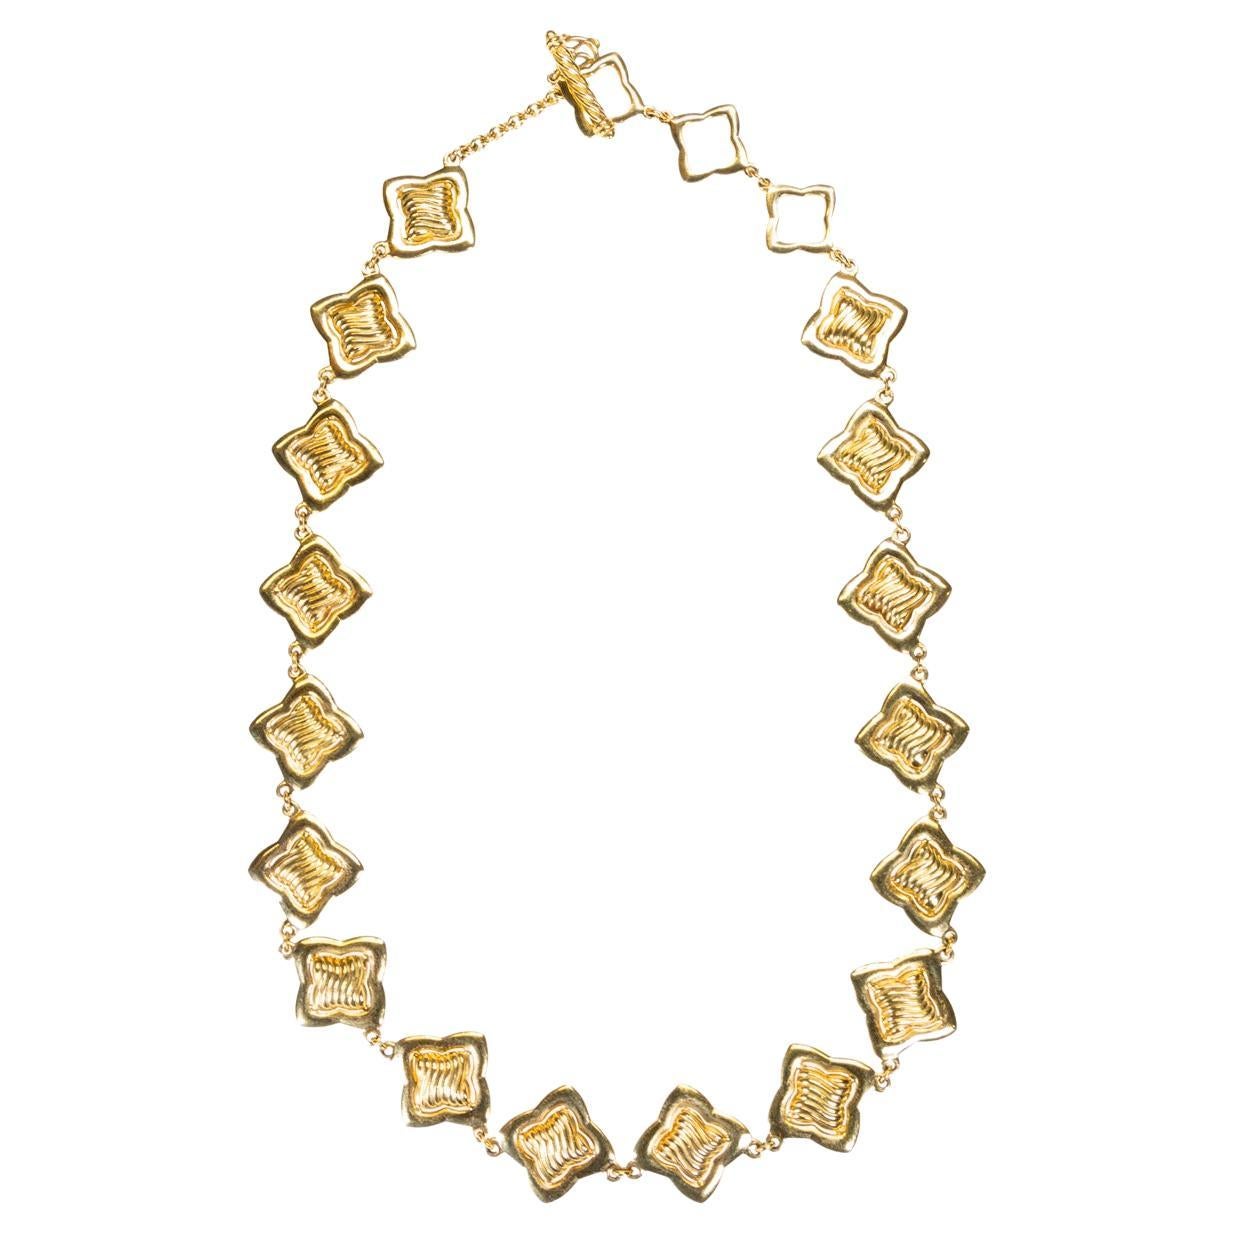 Rare David Yurman Quatrefoil 18K Solid Yellow Gold Necklace Limited Series Piece For Sale